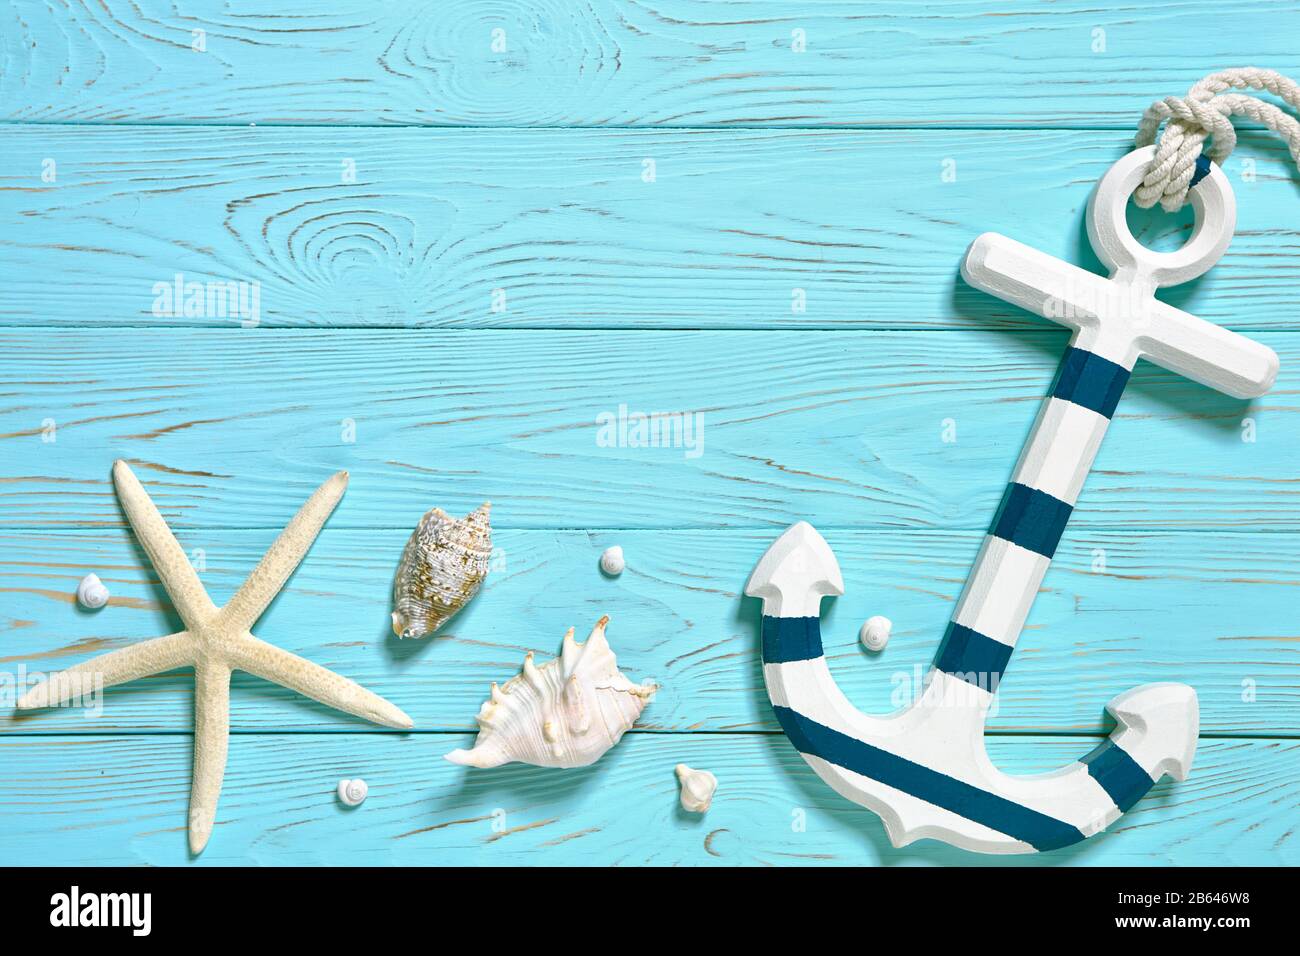 Marine accessories on a blue board.  Summer time sea vacation concept. Place for your text. Stock Photo